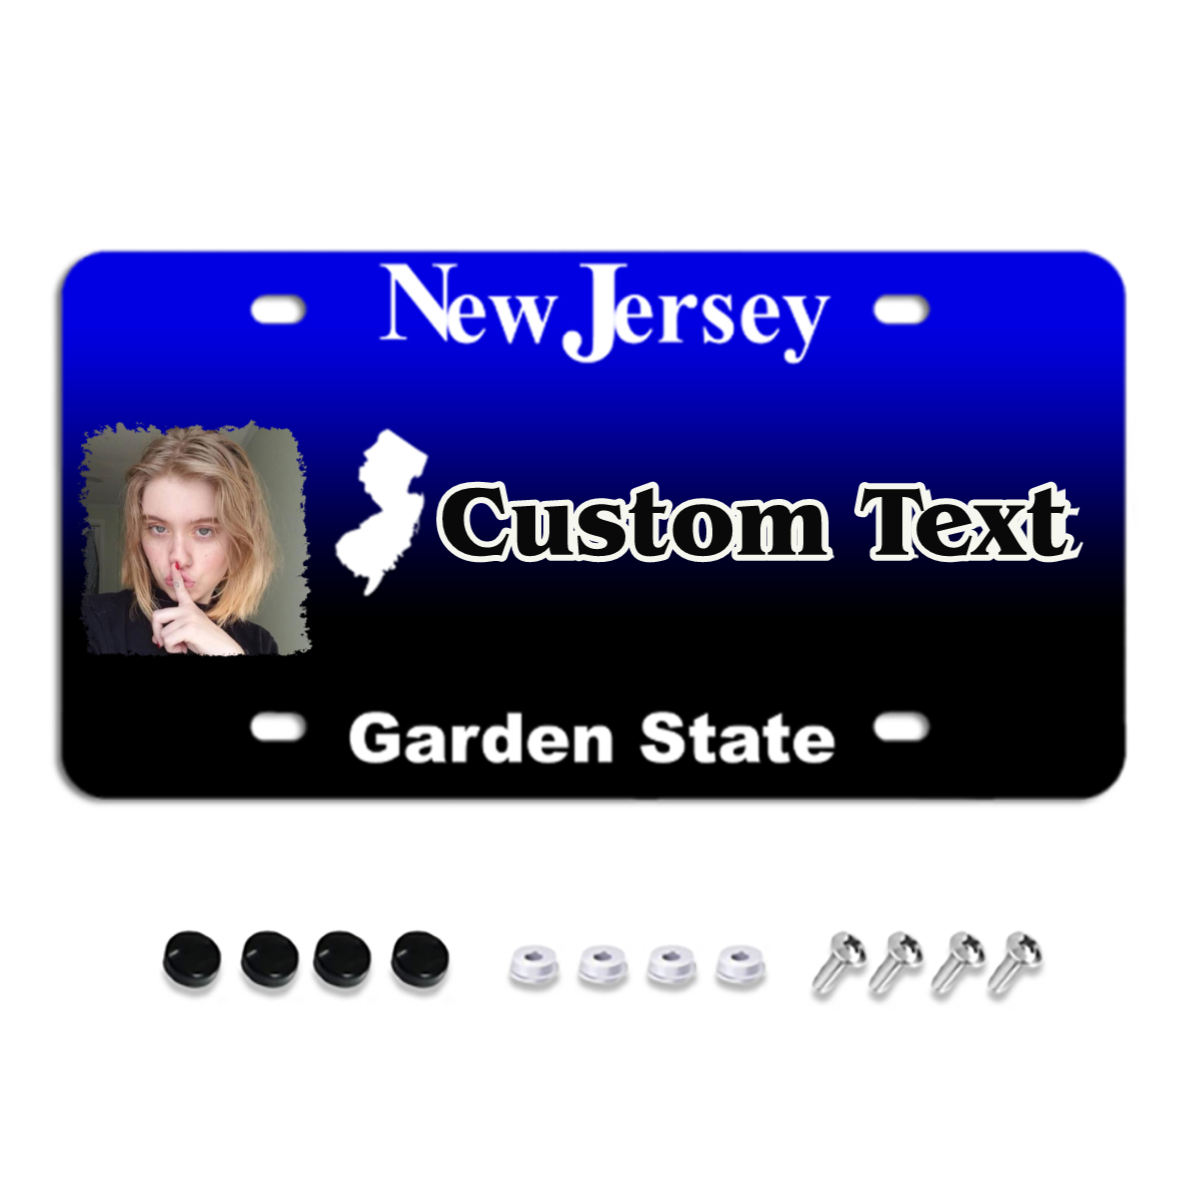 New Jersey Custom License Plates, Personalized Photo & Text & Background